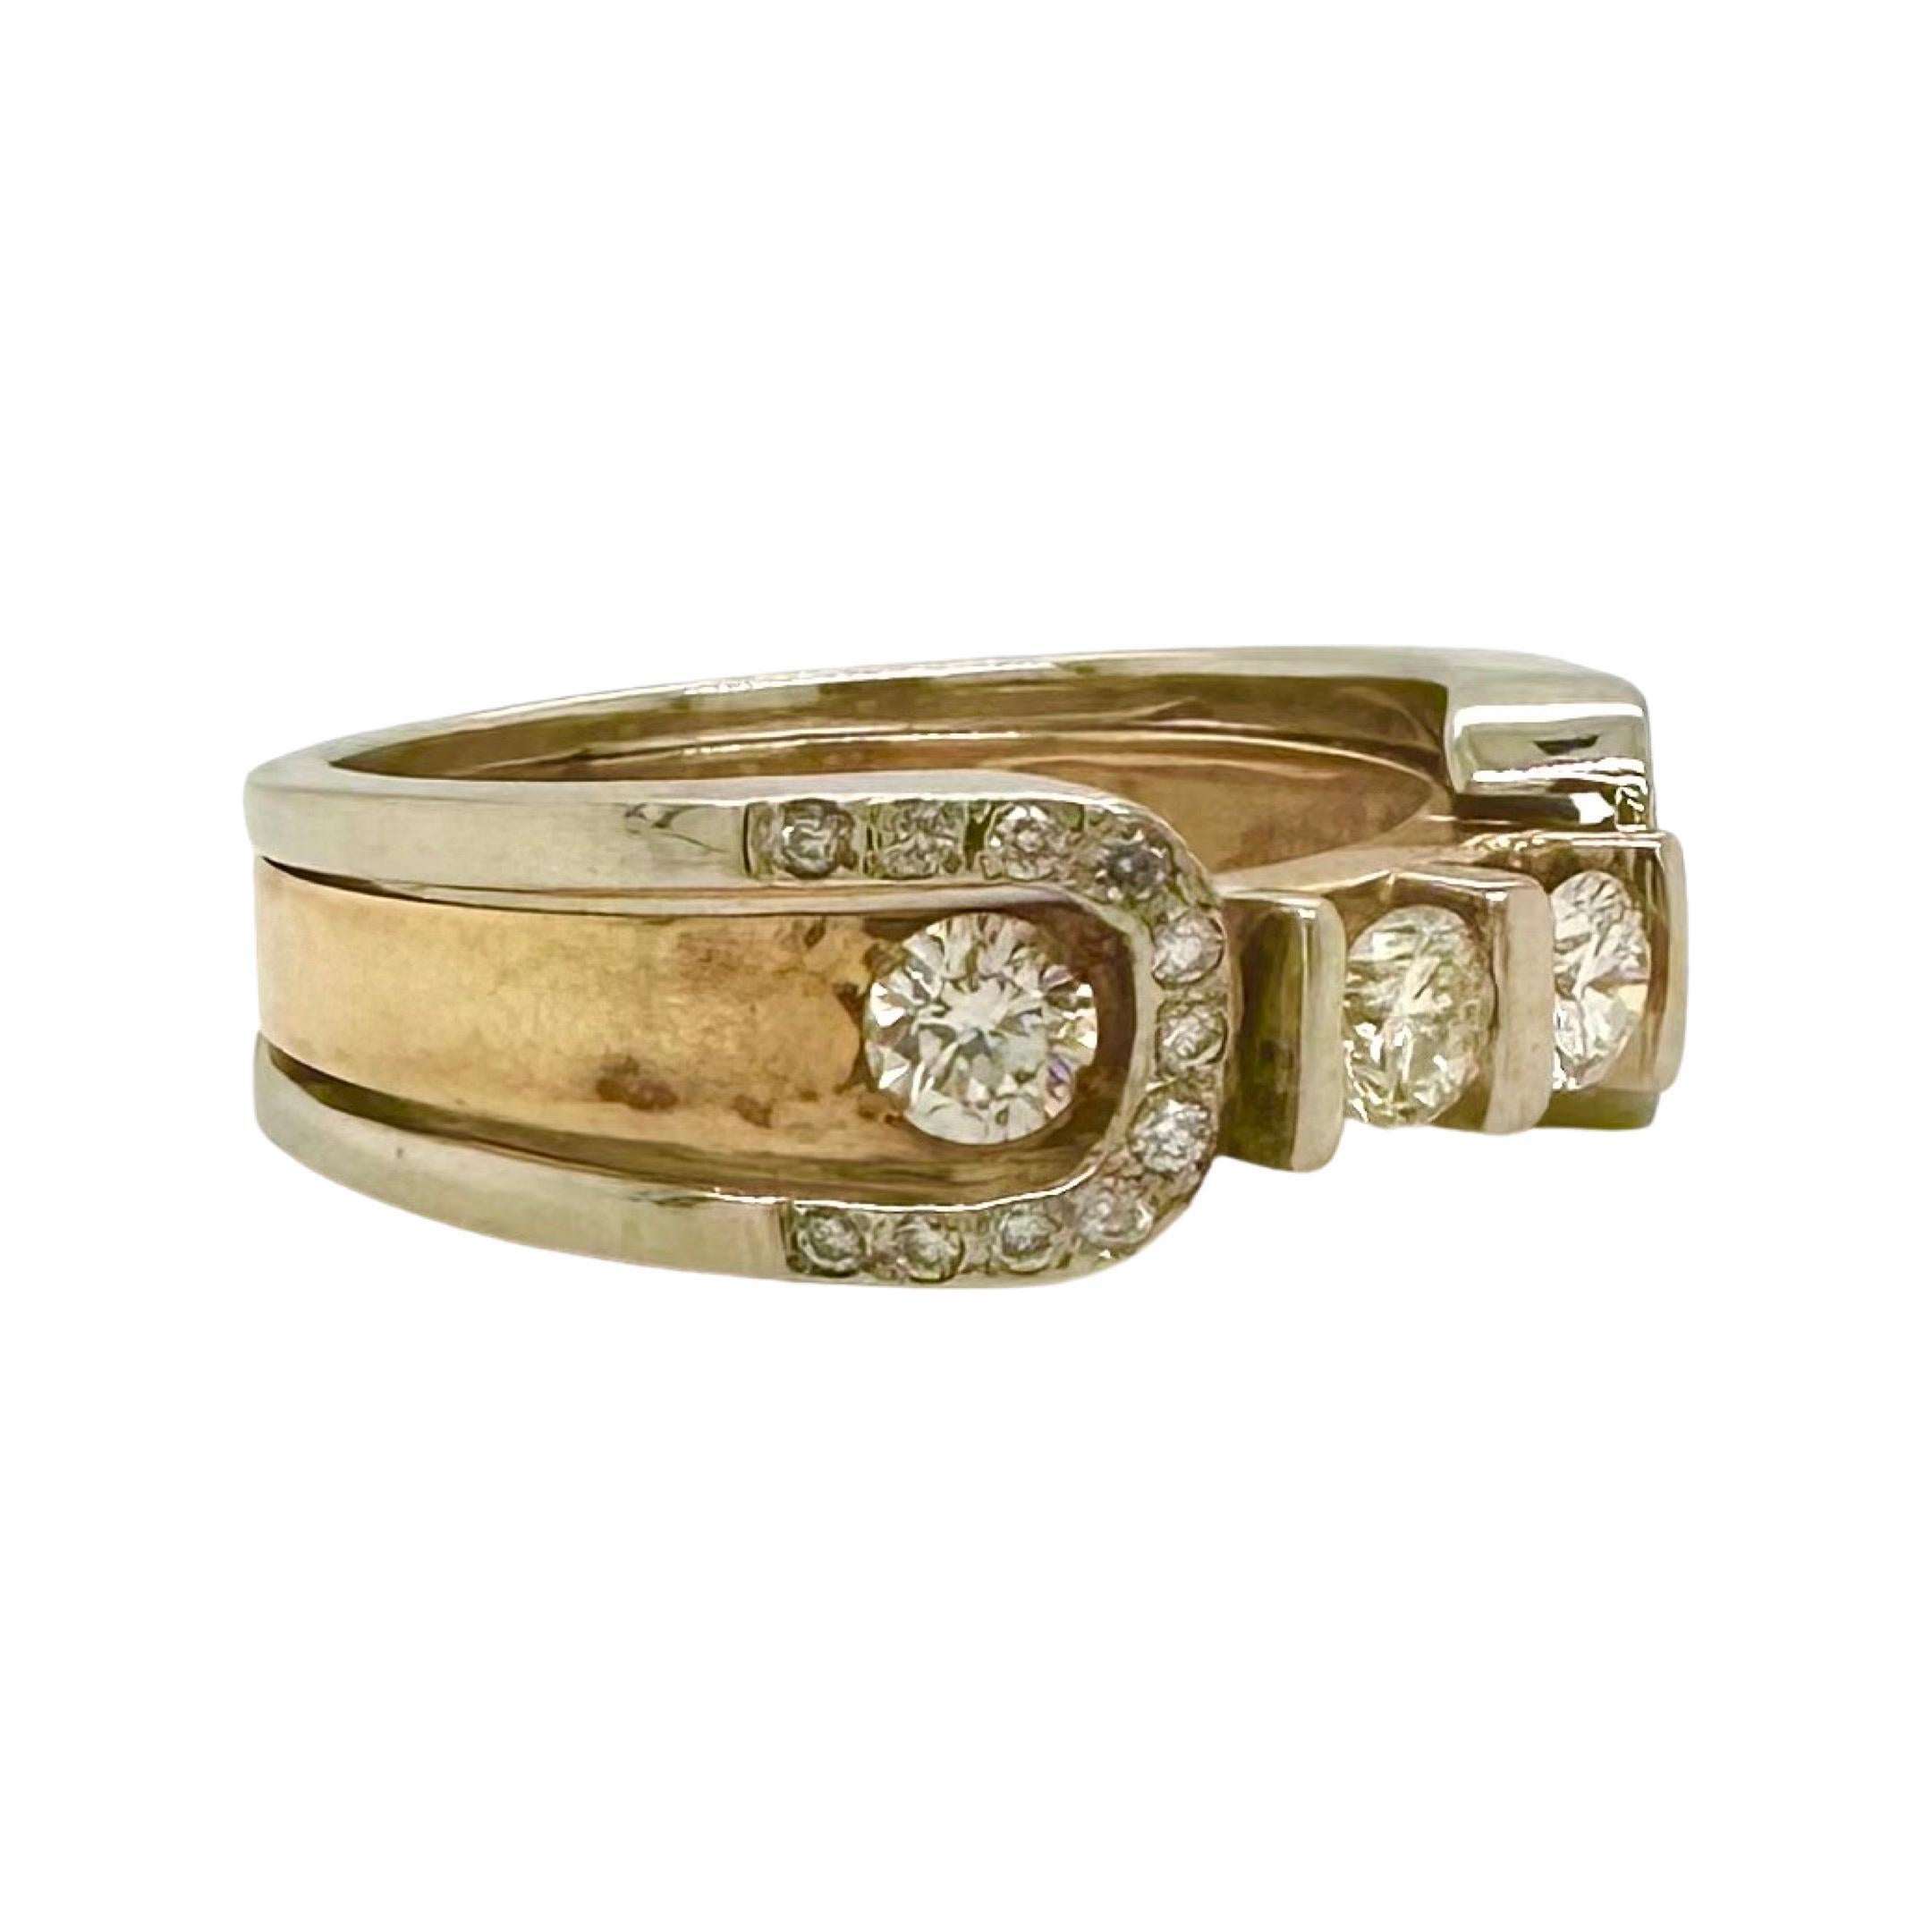 Style: Men's Large Diamond Ring

Metal: Yellow Gold & White Gold 

Metal Purity: 14K 

​​​​​​​Stones: Diamonds

Diamond Color: J

Diamond Clarity: SI1

​​​​​​​Total Carat Weight: Approx 1.1 ct​​​​​​​

Ring Size: 11.5 (sizable)

Includes: 24 Month